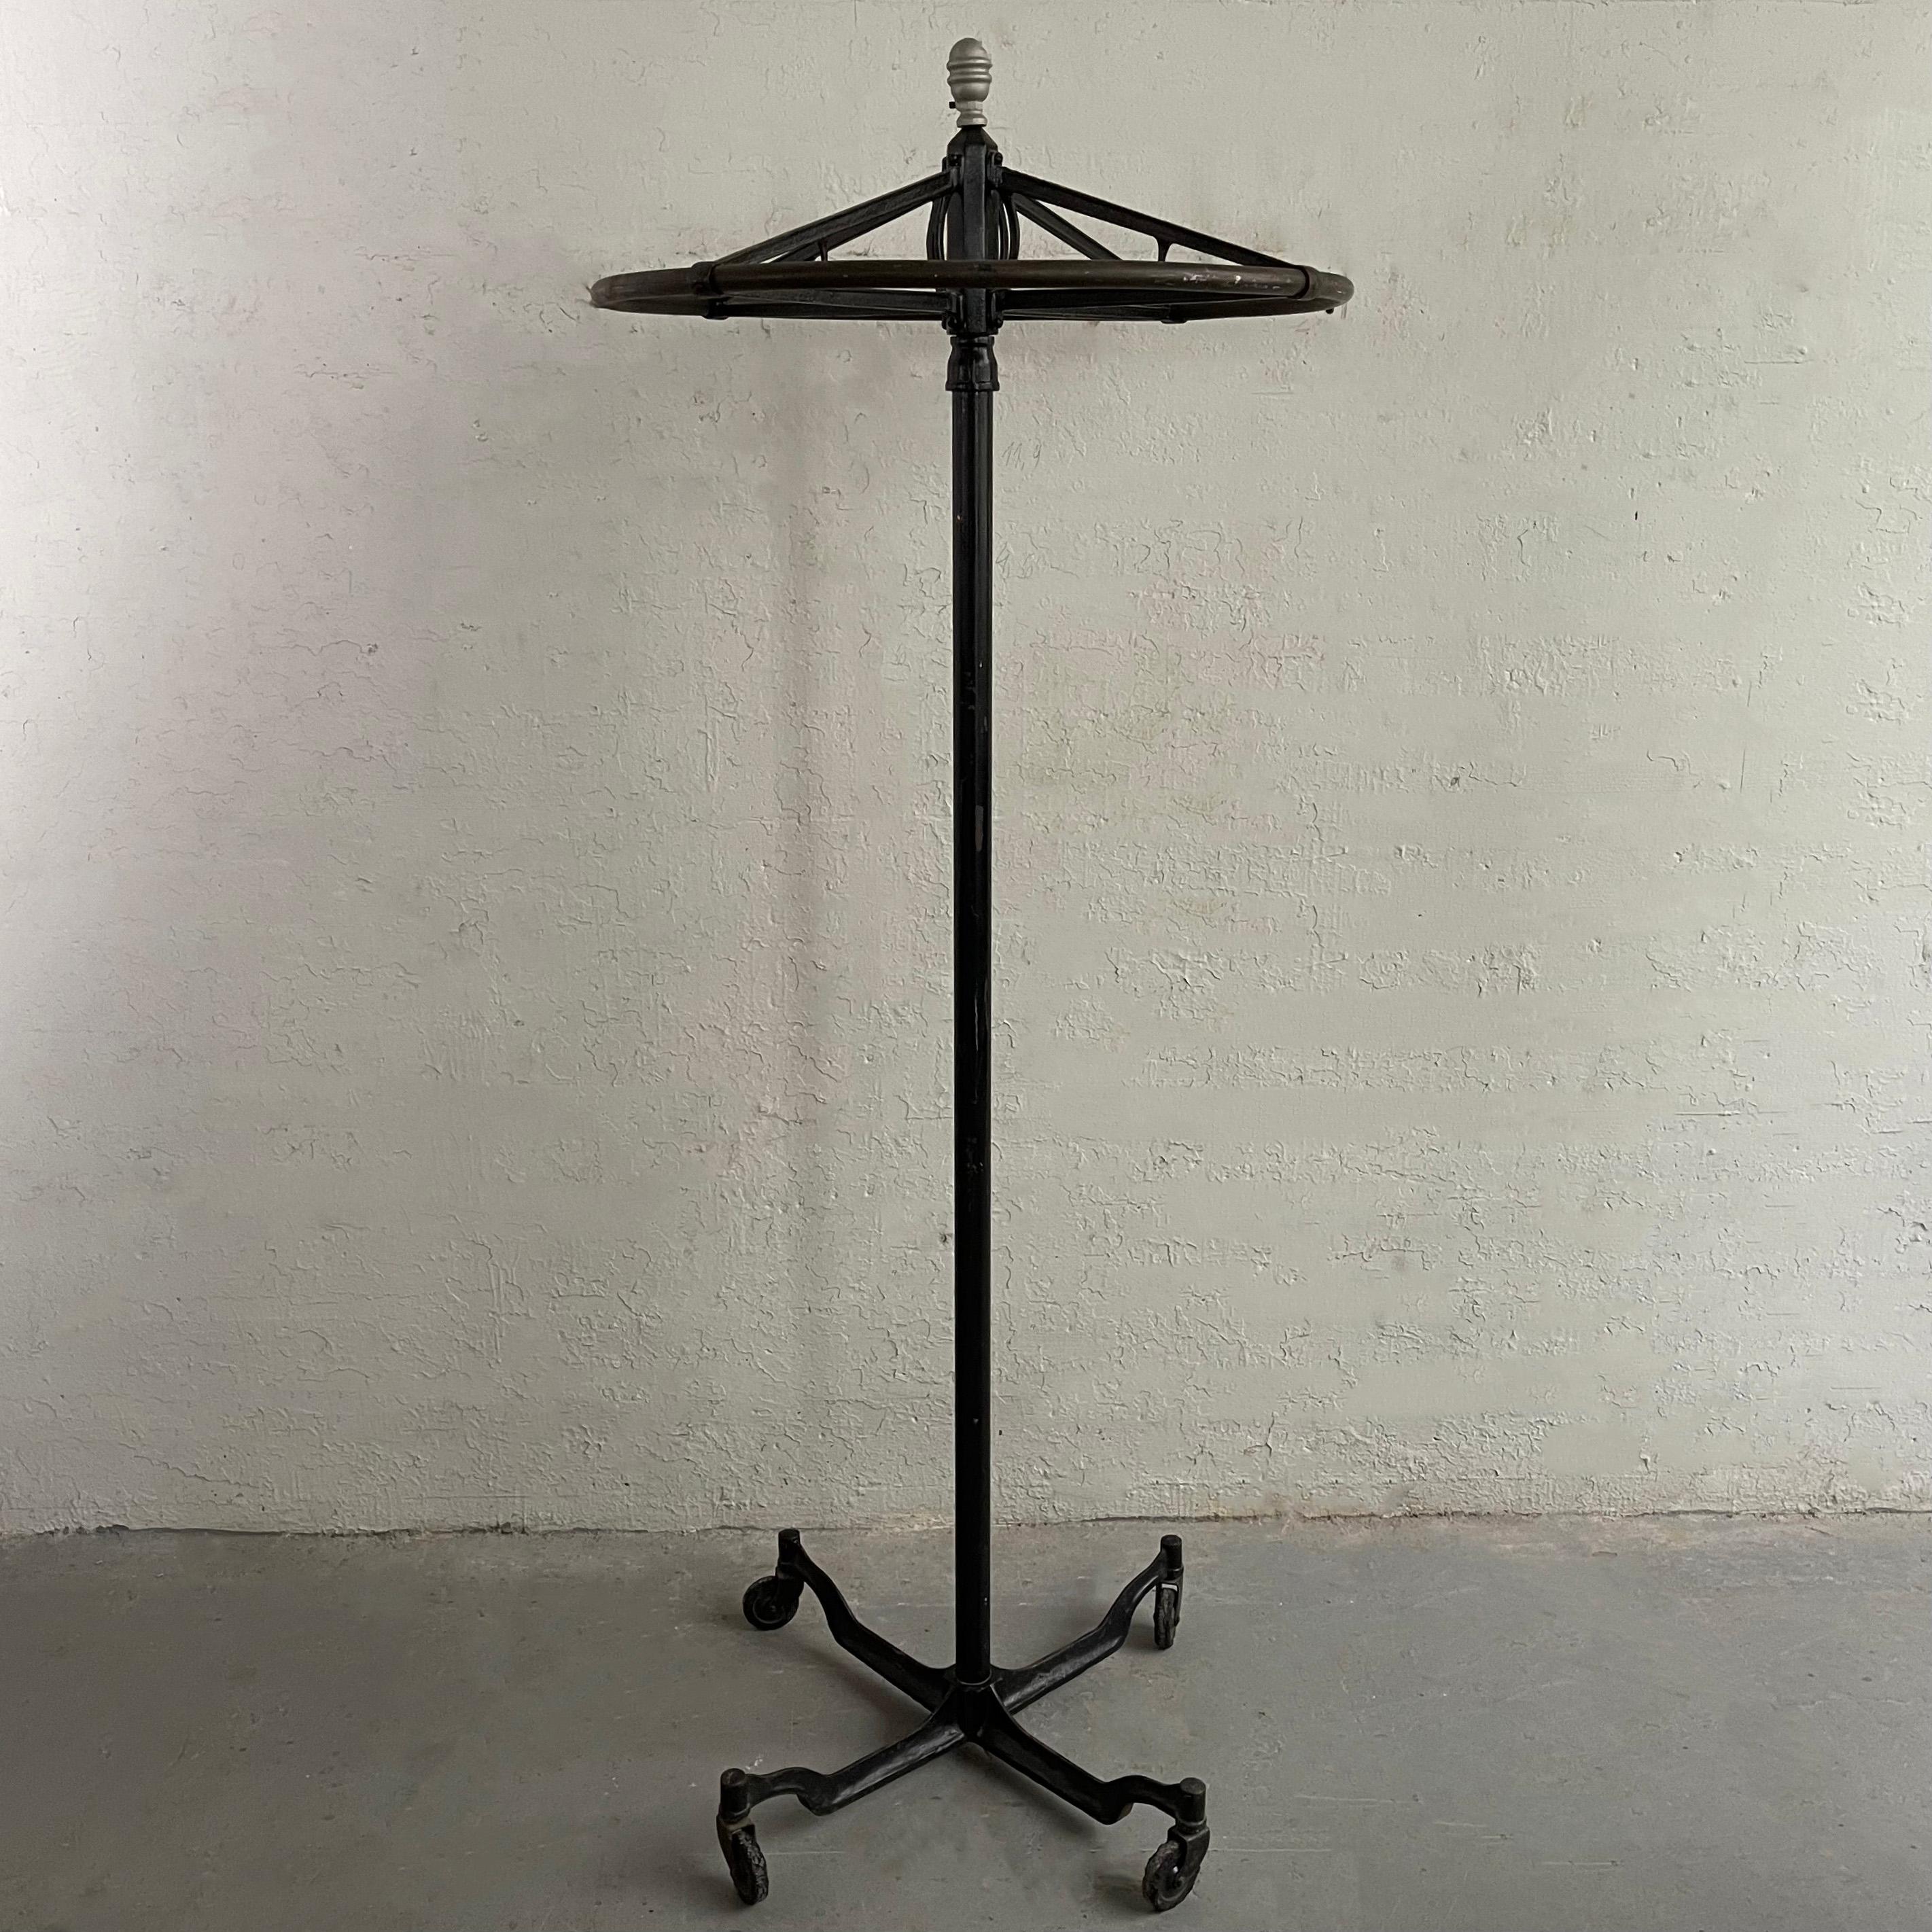 Early 20th century, industrial, cast iron rounder garment rack features a 30 inch round rotating rack on a rolling stem. The round rack separates from the stem for transport.